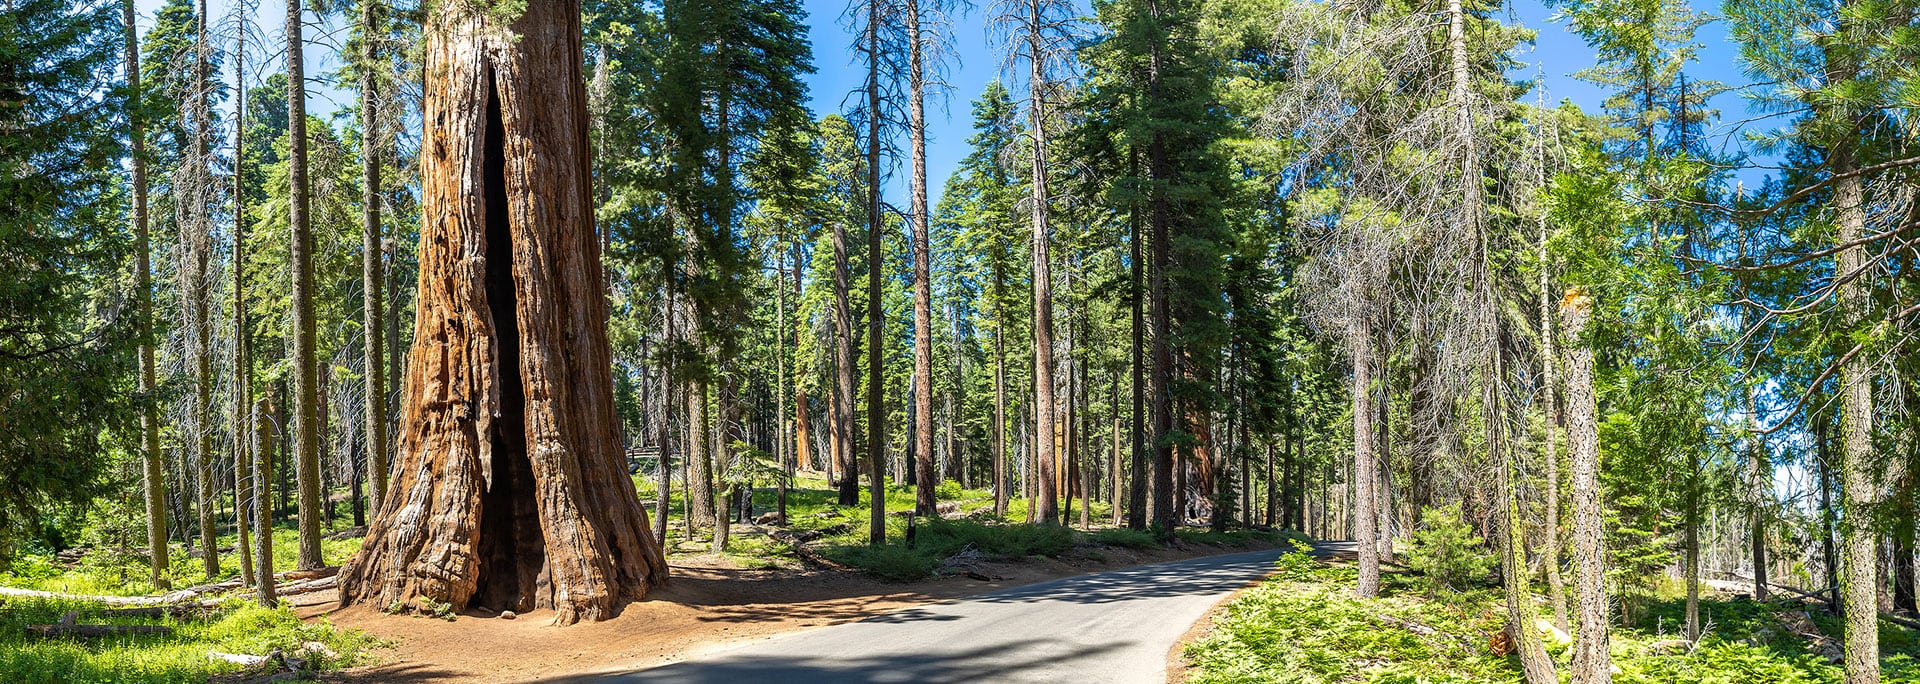 This image encapsulates the enchanting beauty and tranquil atmosphere of Sequoia National Park, inviting visitors to explore and marvel at the awe-inspiring wonders of the natural world.